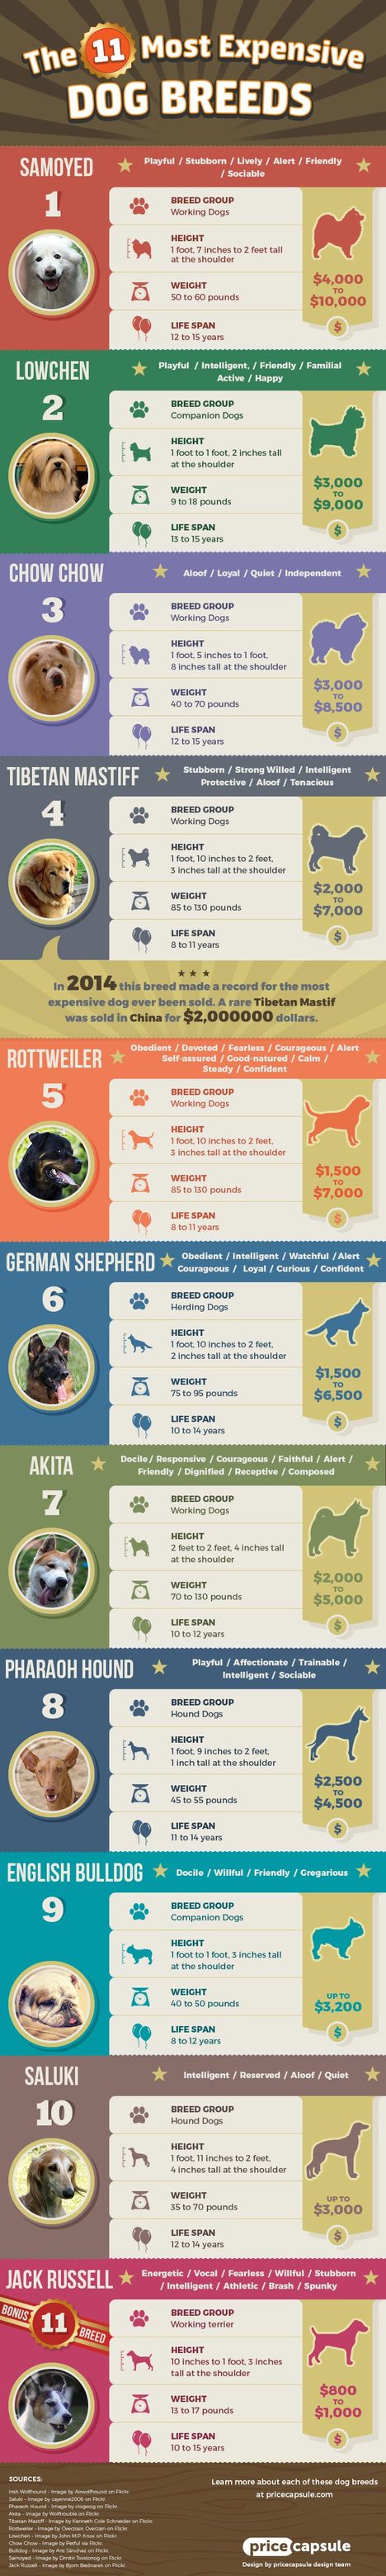 11 Most Expensive Dog Breeds